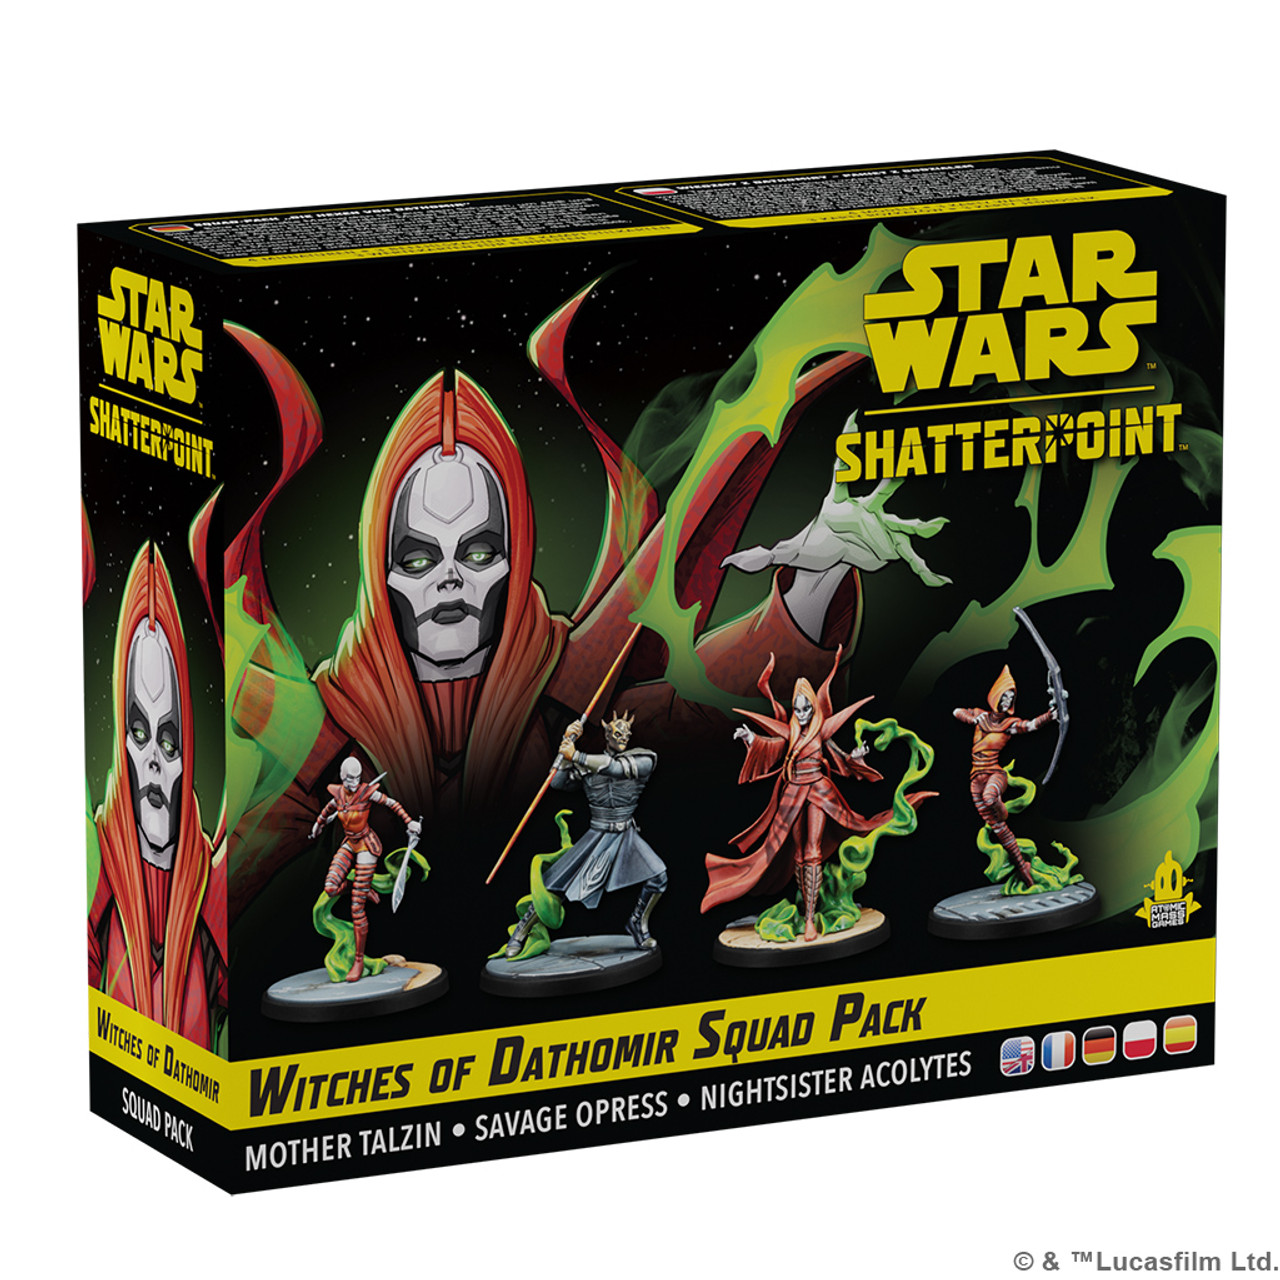 SWP07 - STAR WARS: SHATTERPOINT - WITCHES OF DATHOMIR: MOTHER TALZIN SQUAD PACK